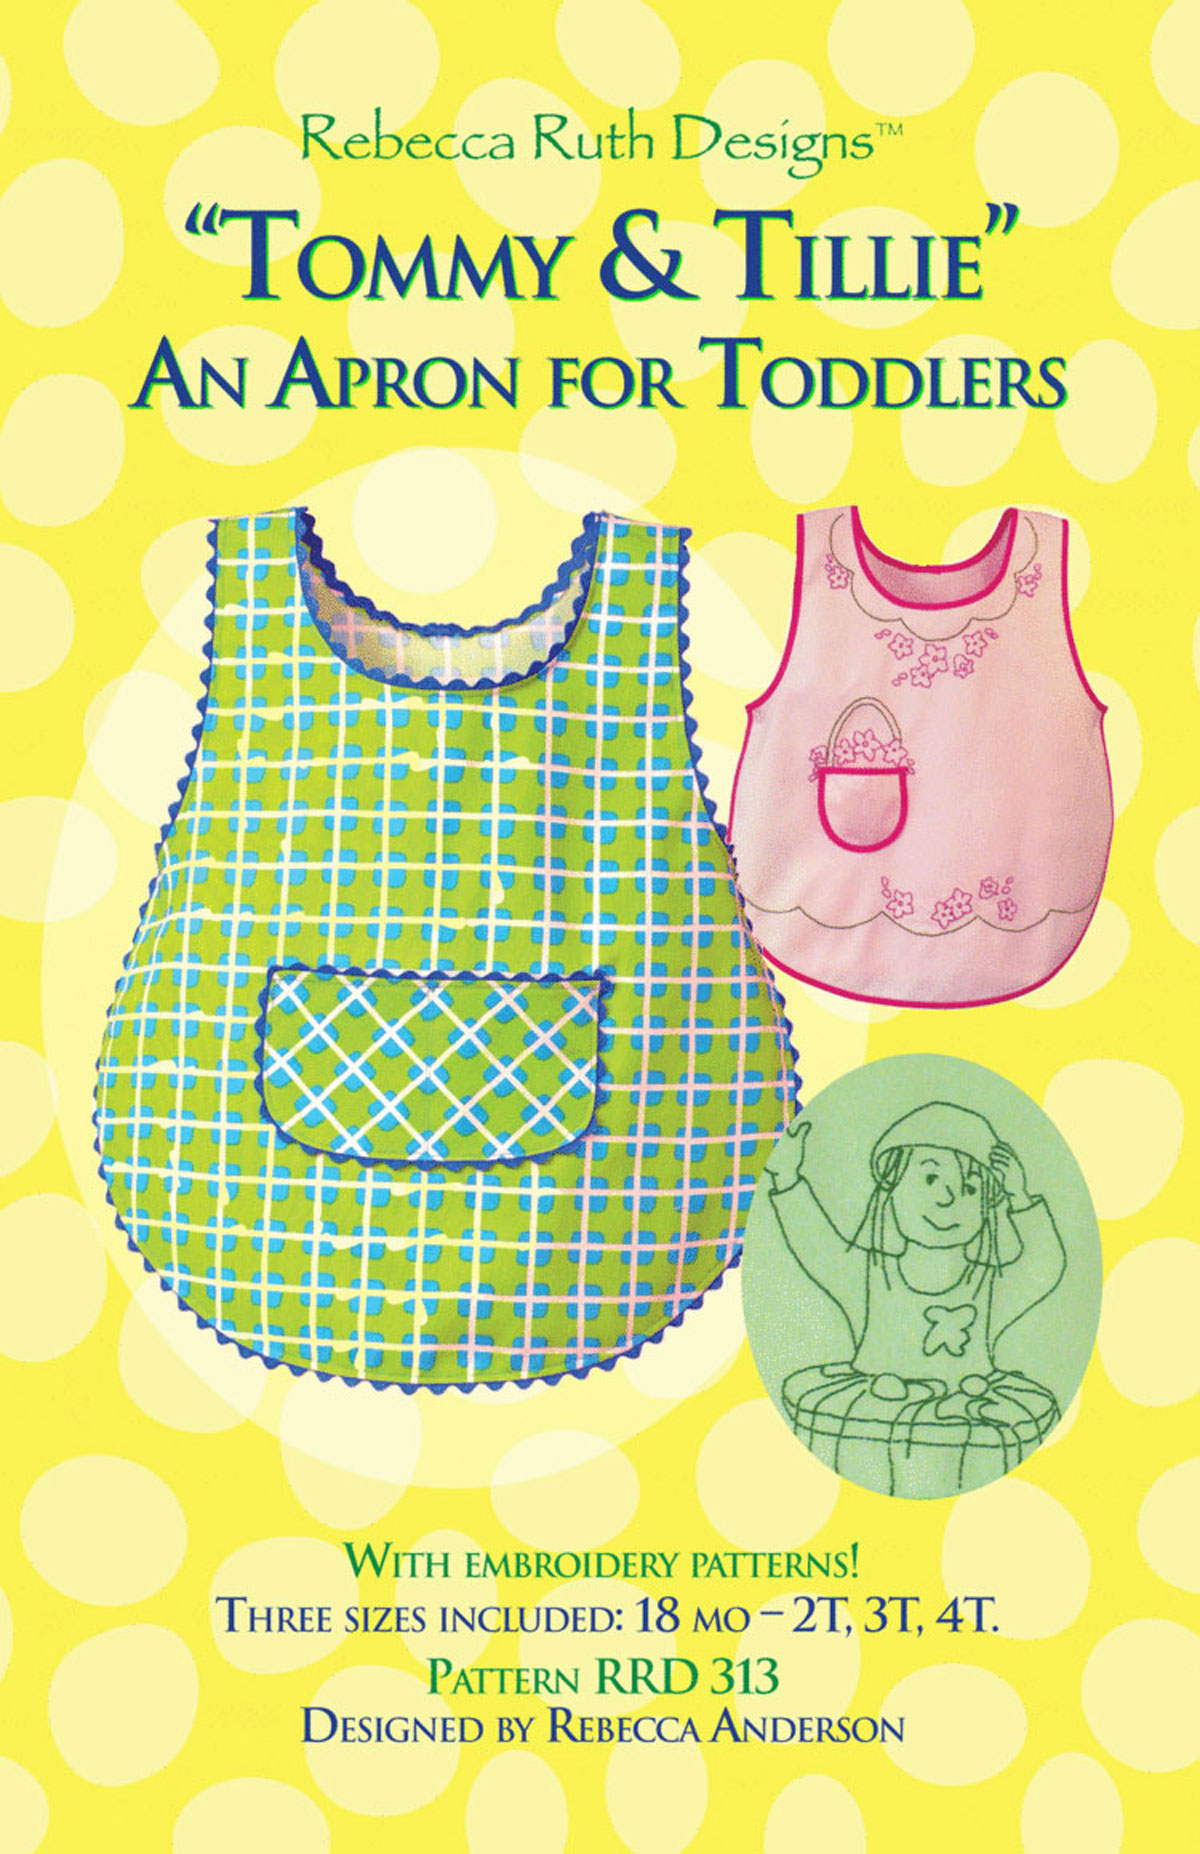 Tommy-and-Tillie-apron-sewing-pattern-rebecca-ruth-designs-front